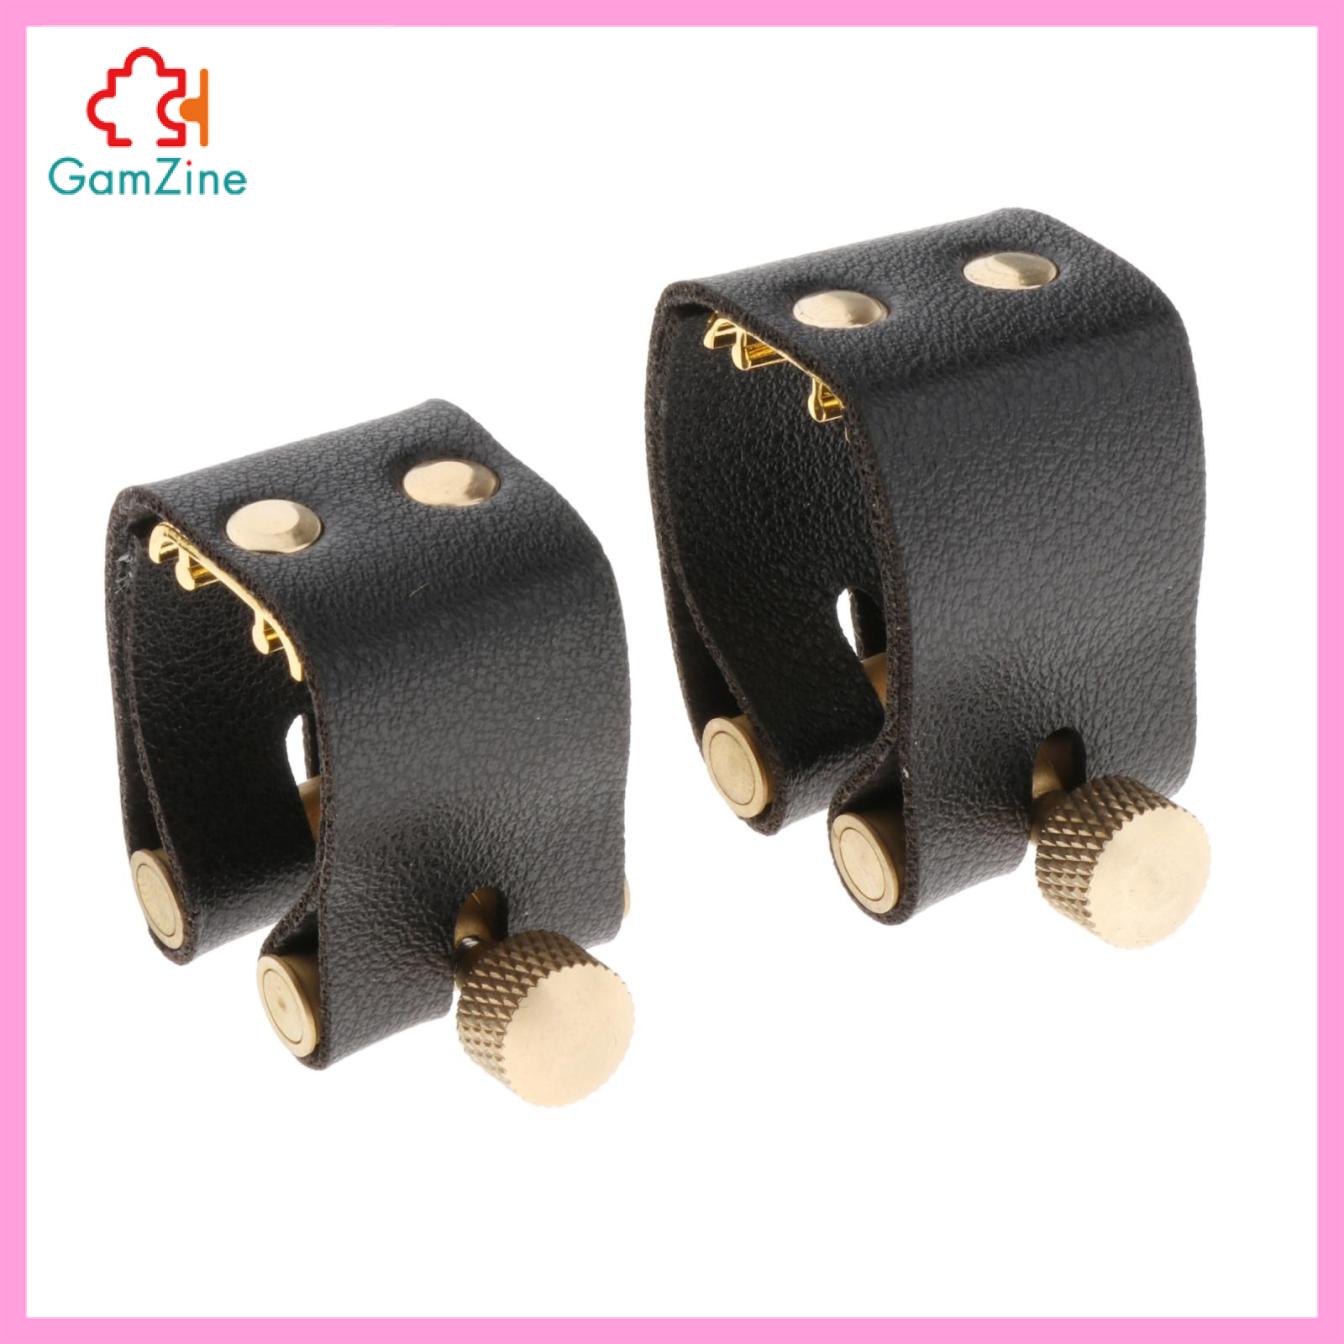 GamZine Pro Saxophone Ligature Compact Fastener for Sax Musical Instruments Part for